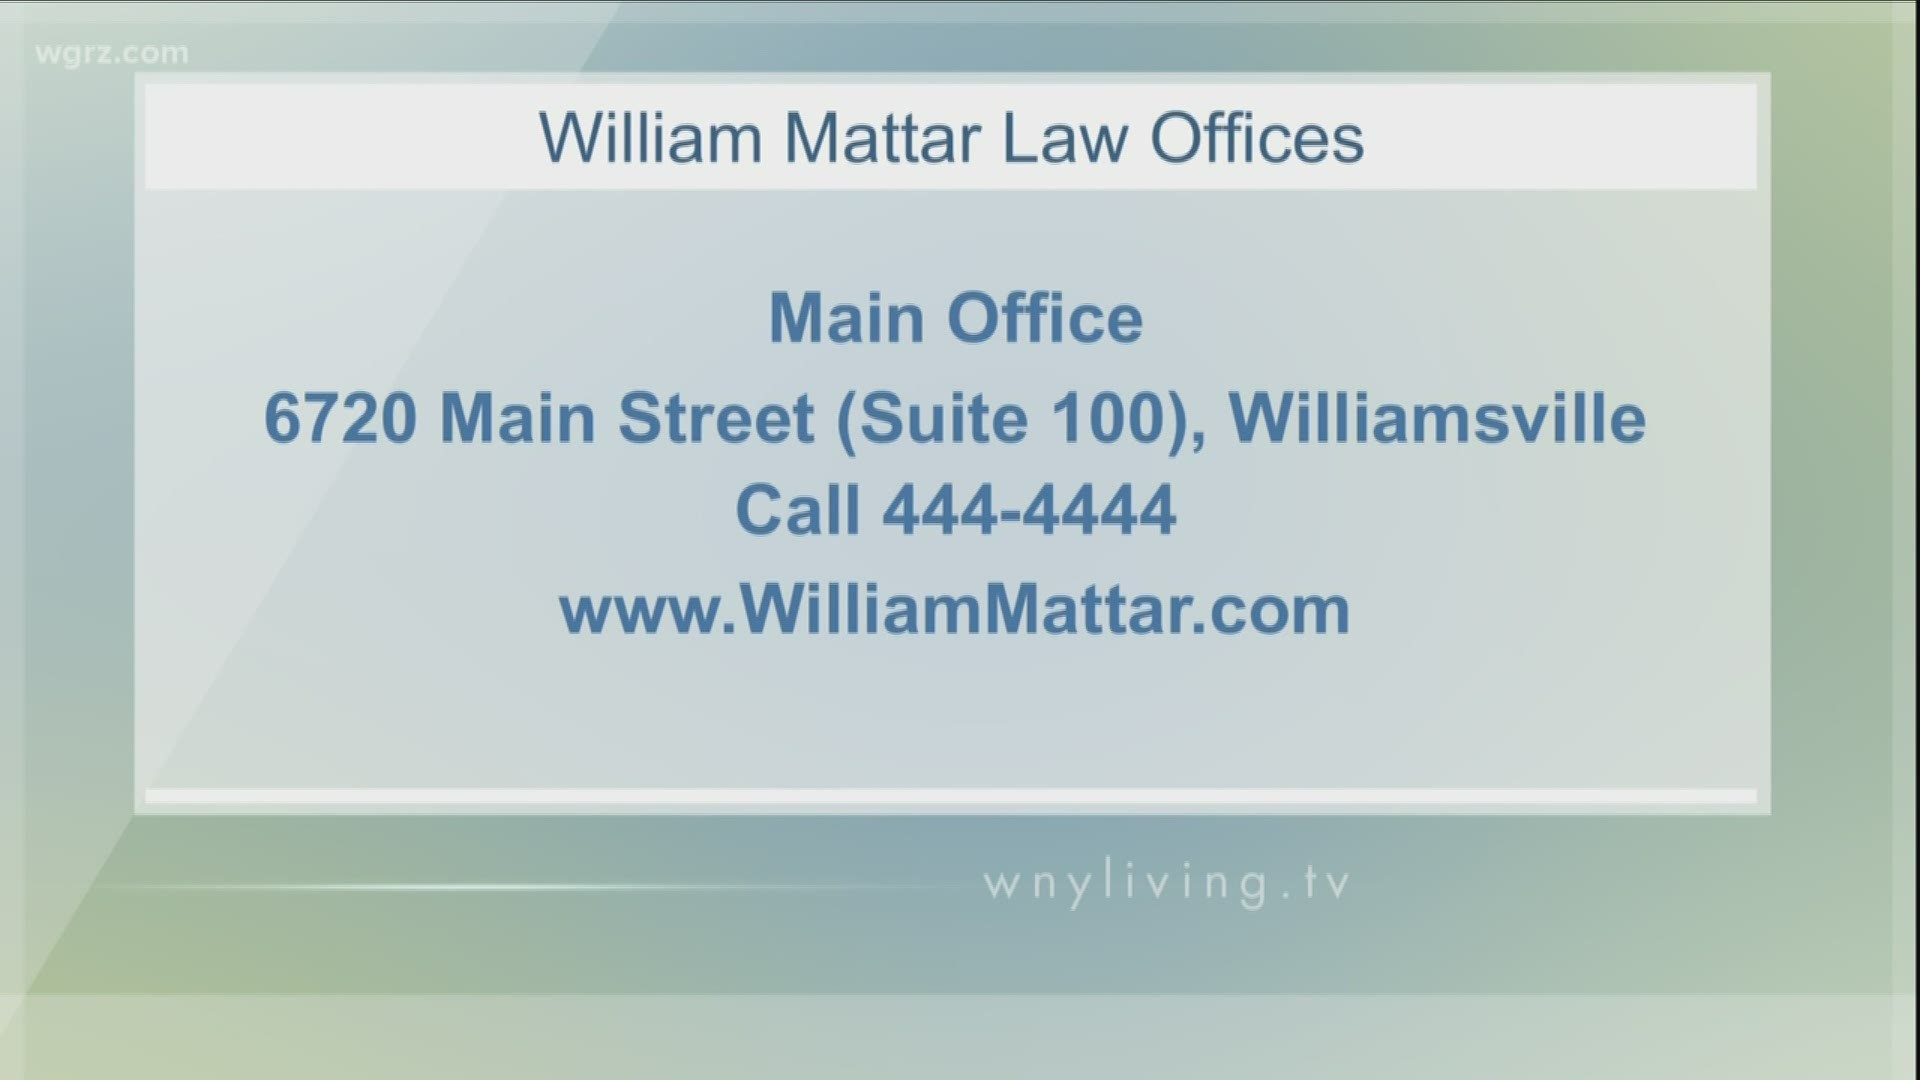 March 7 - William Mattar Law Offices (THIS VIDEO IS SPONSORED BY WILLIAM MATTAR LAW OFFICES)